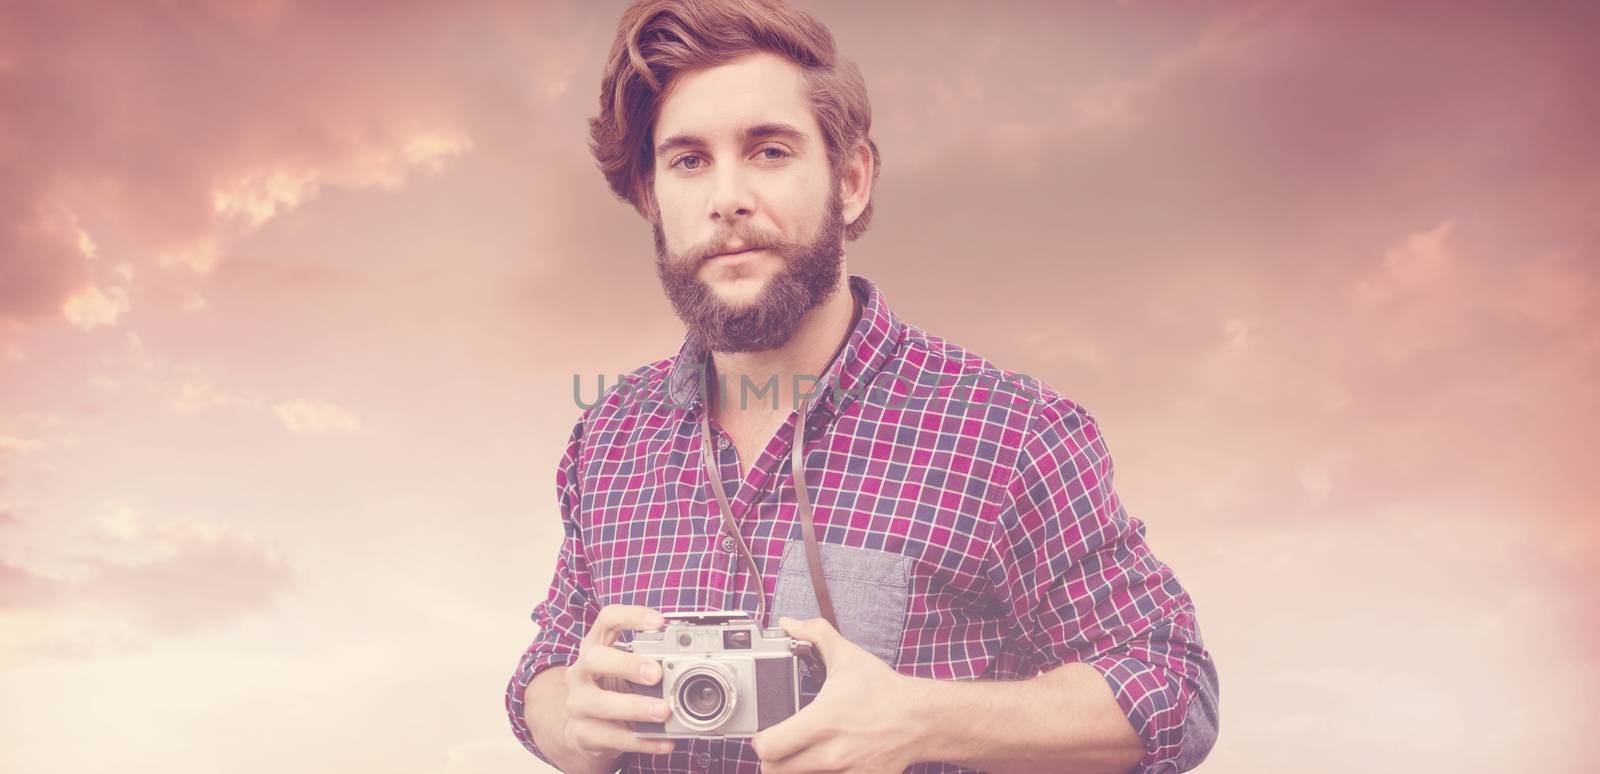 Portrait of confident hipster using camera against blue and orange sky with clouds